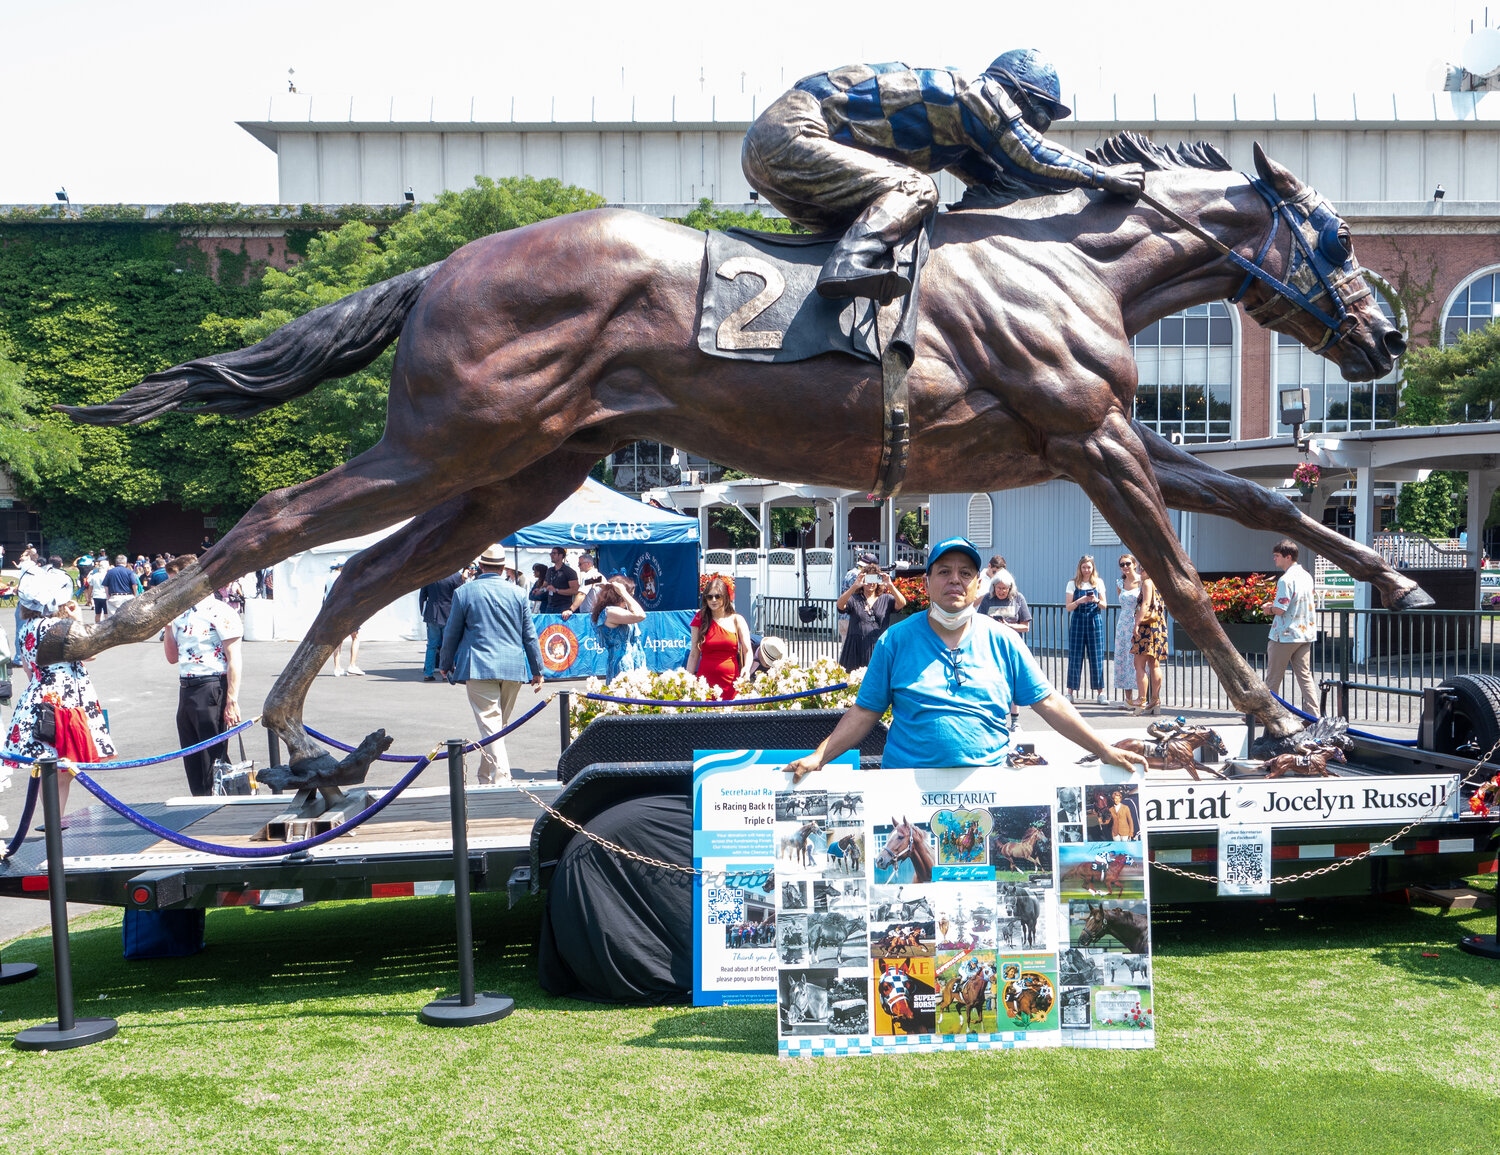 Queens resident Luis Ramos celebrated the 50th anniversary of Secretariat’s Triple Crown win at Belmont Park in front of the statue.